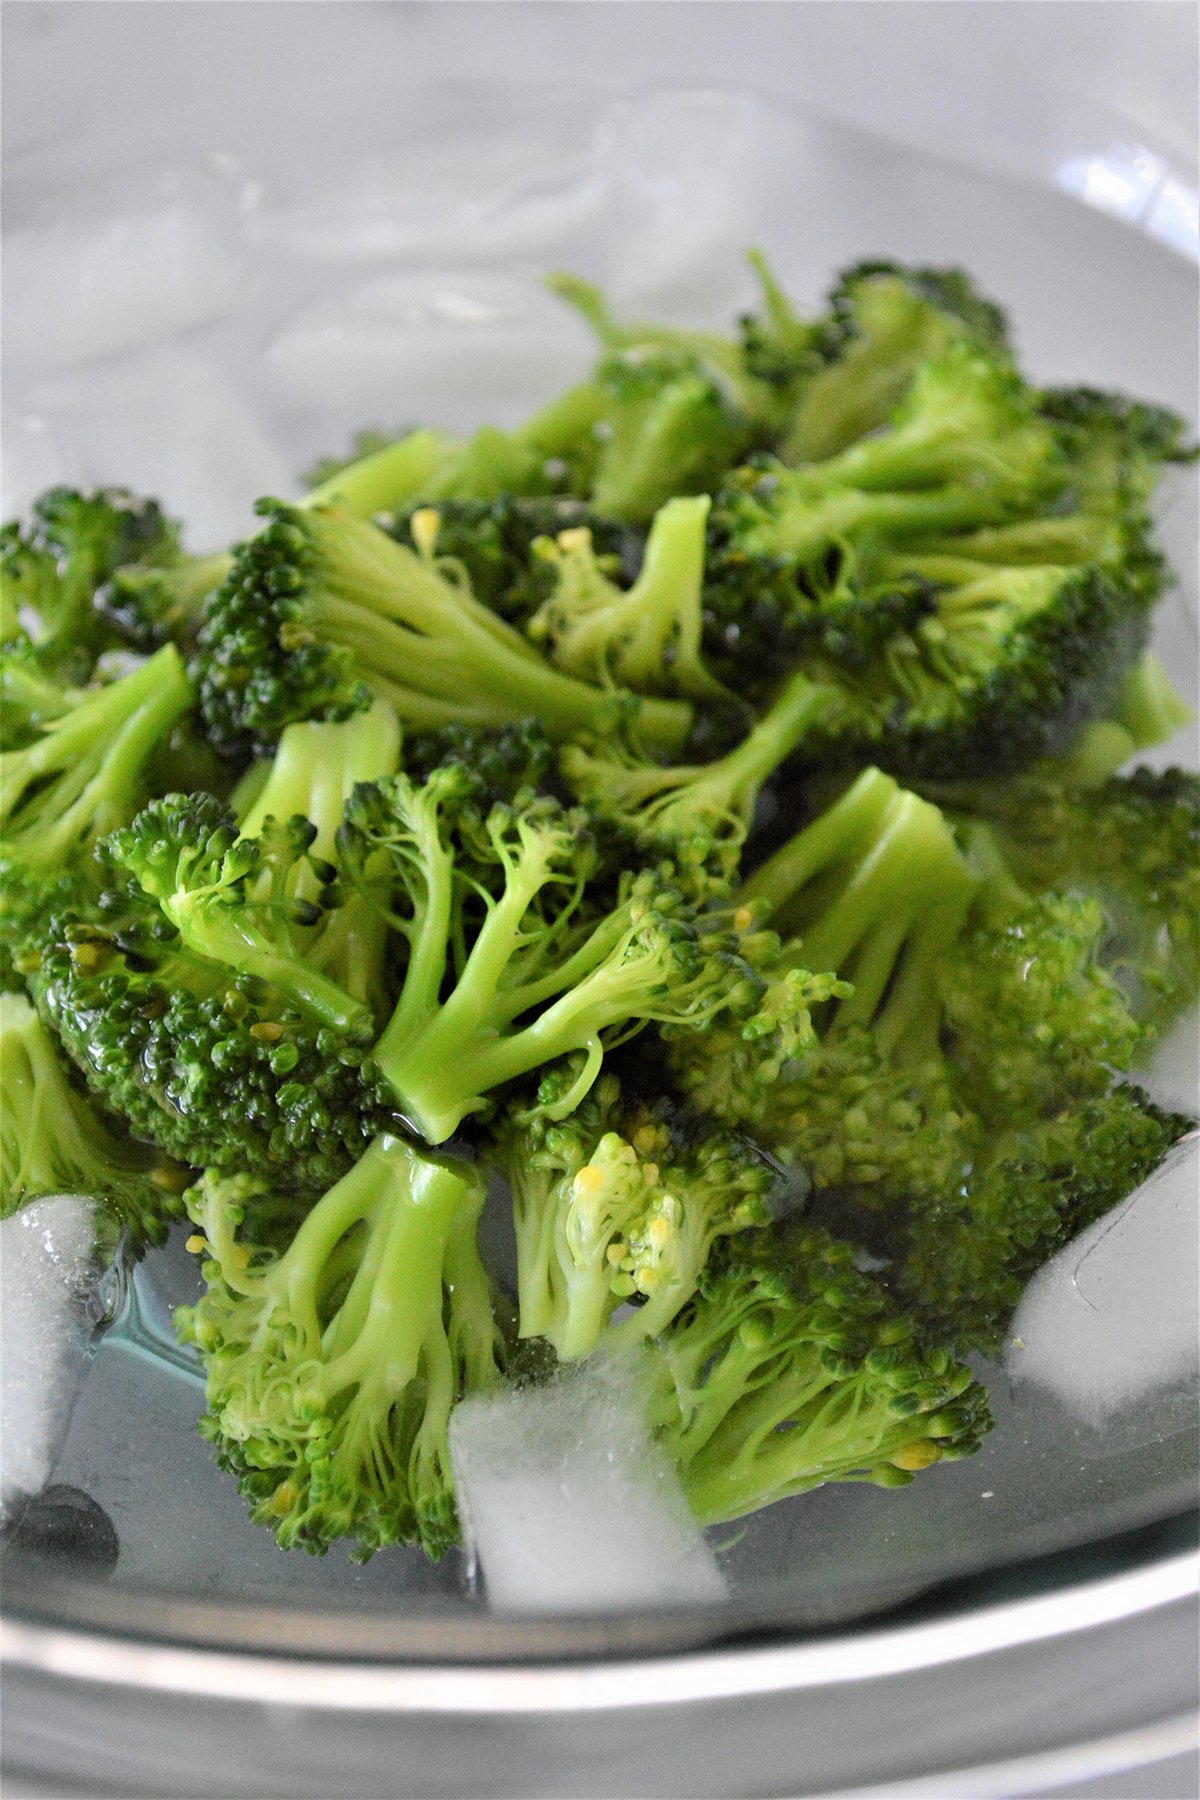 blanced broccoli florets in a bowl of iced water